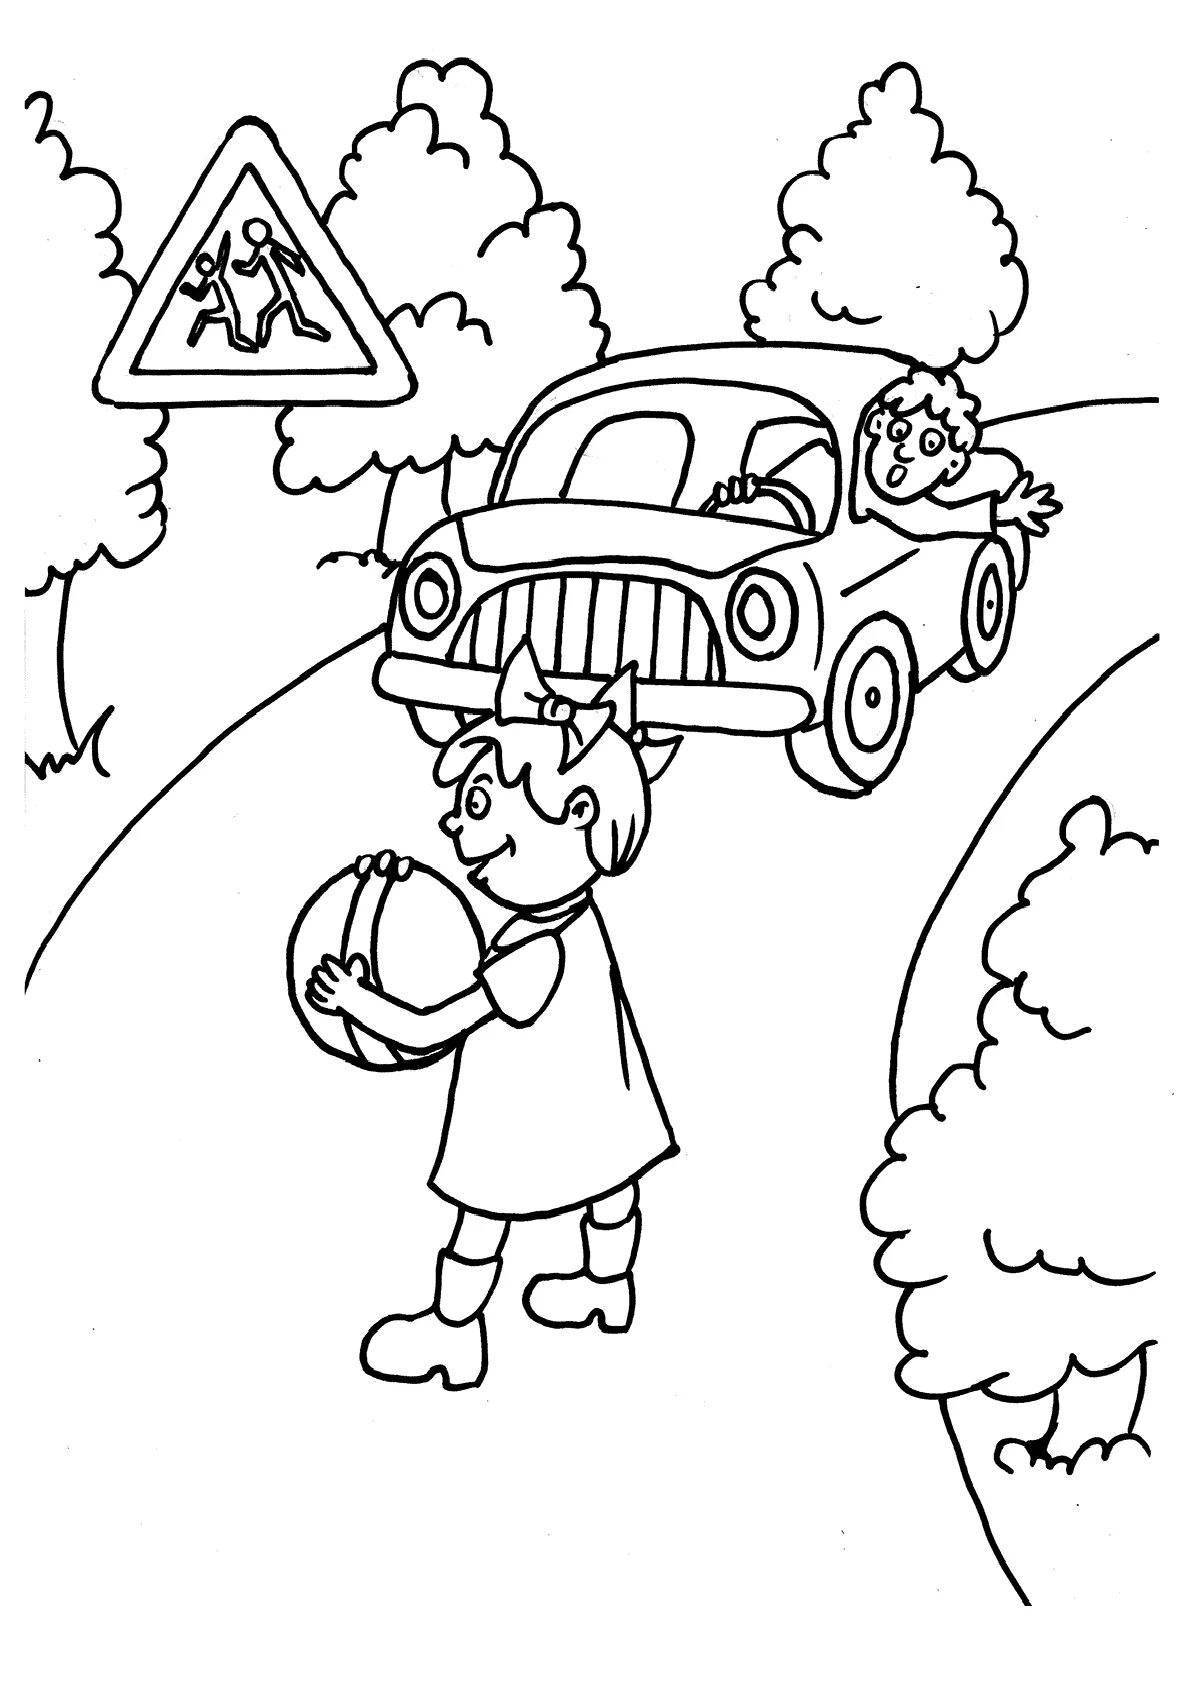 Great traffic safety coloring page